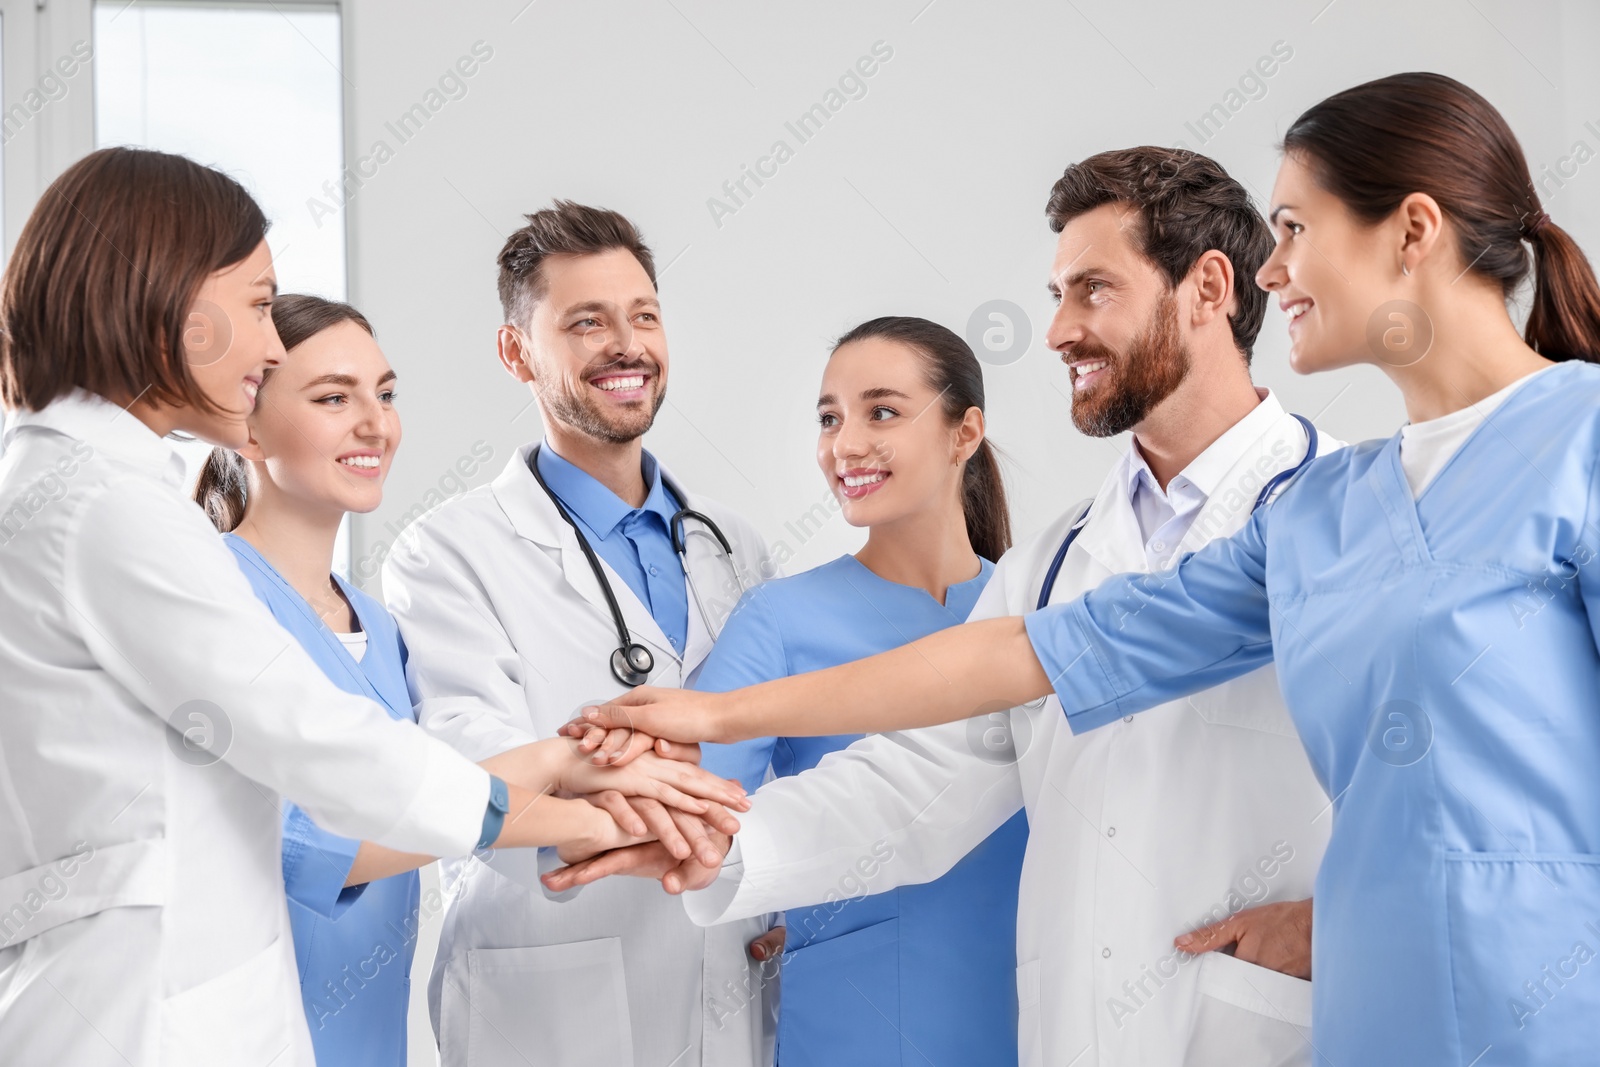 Photo of Team of medical doctors putting hands together indoors